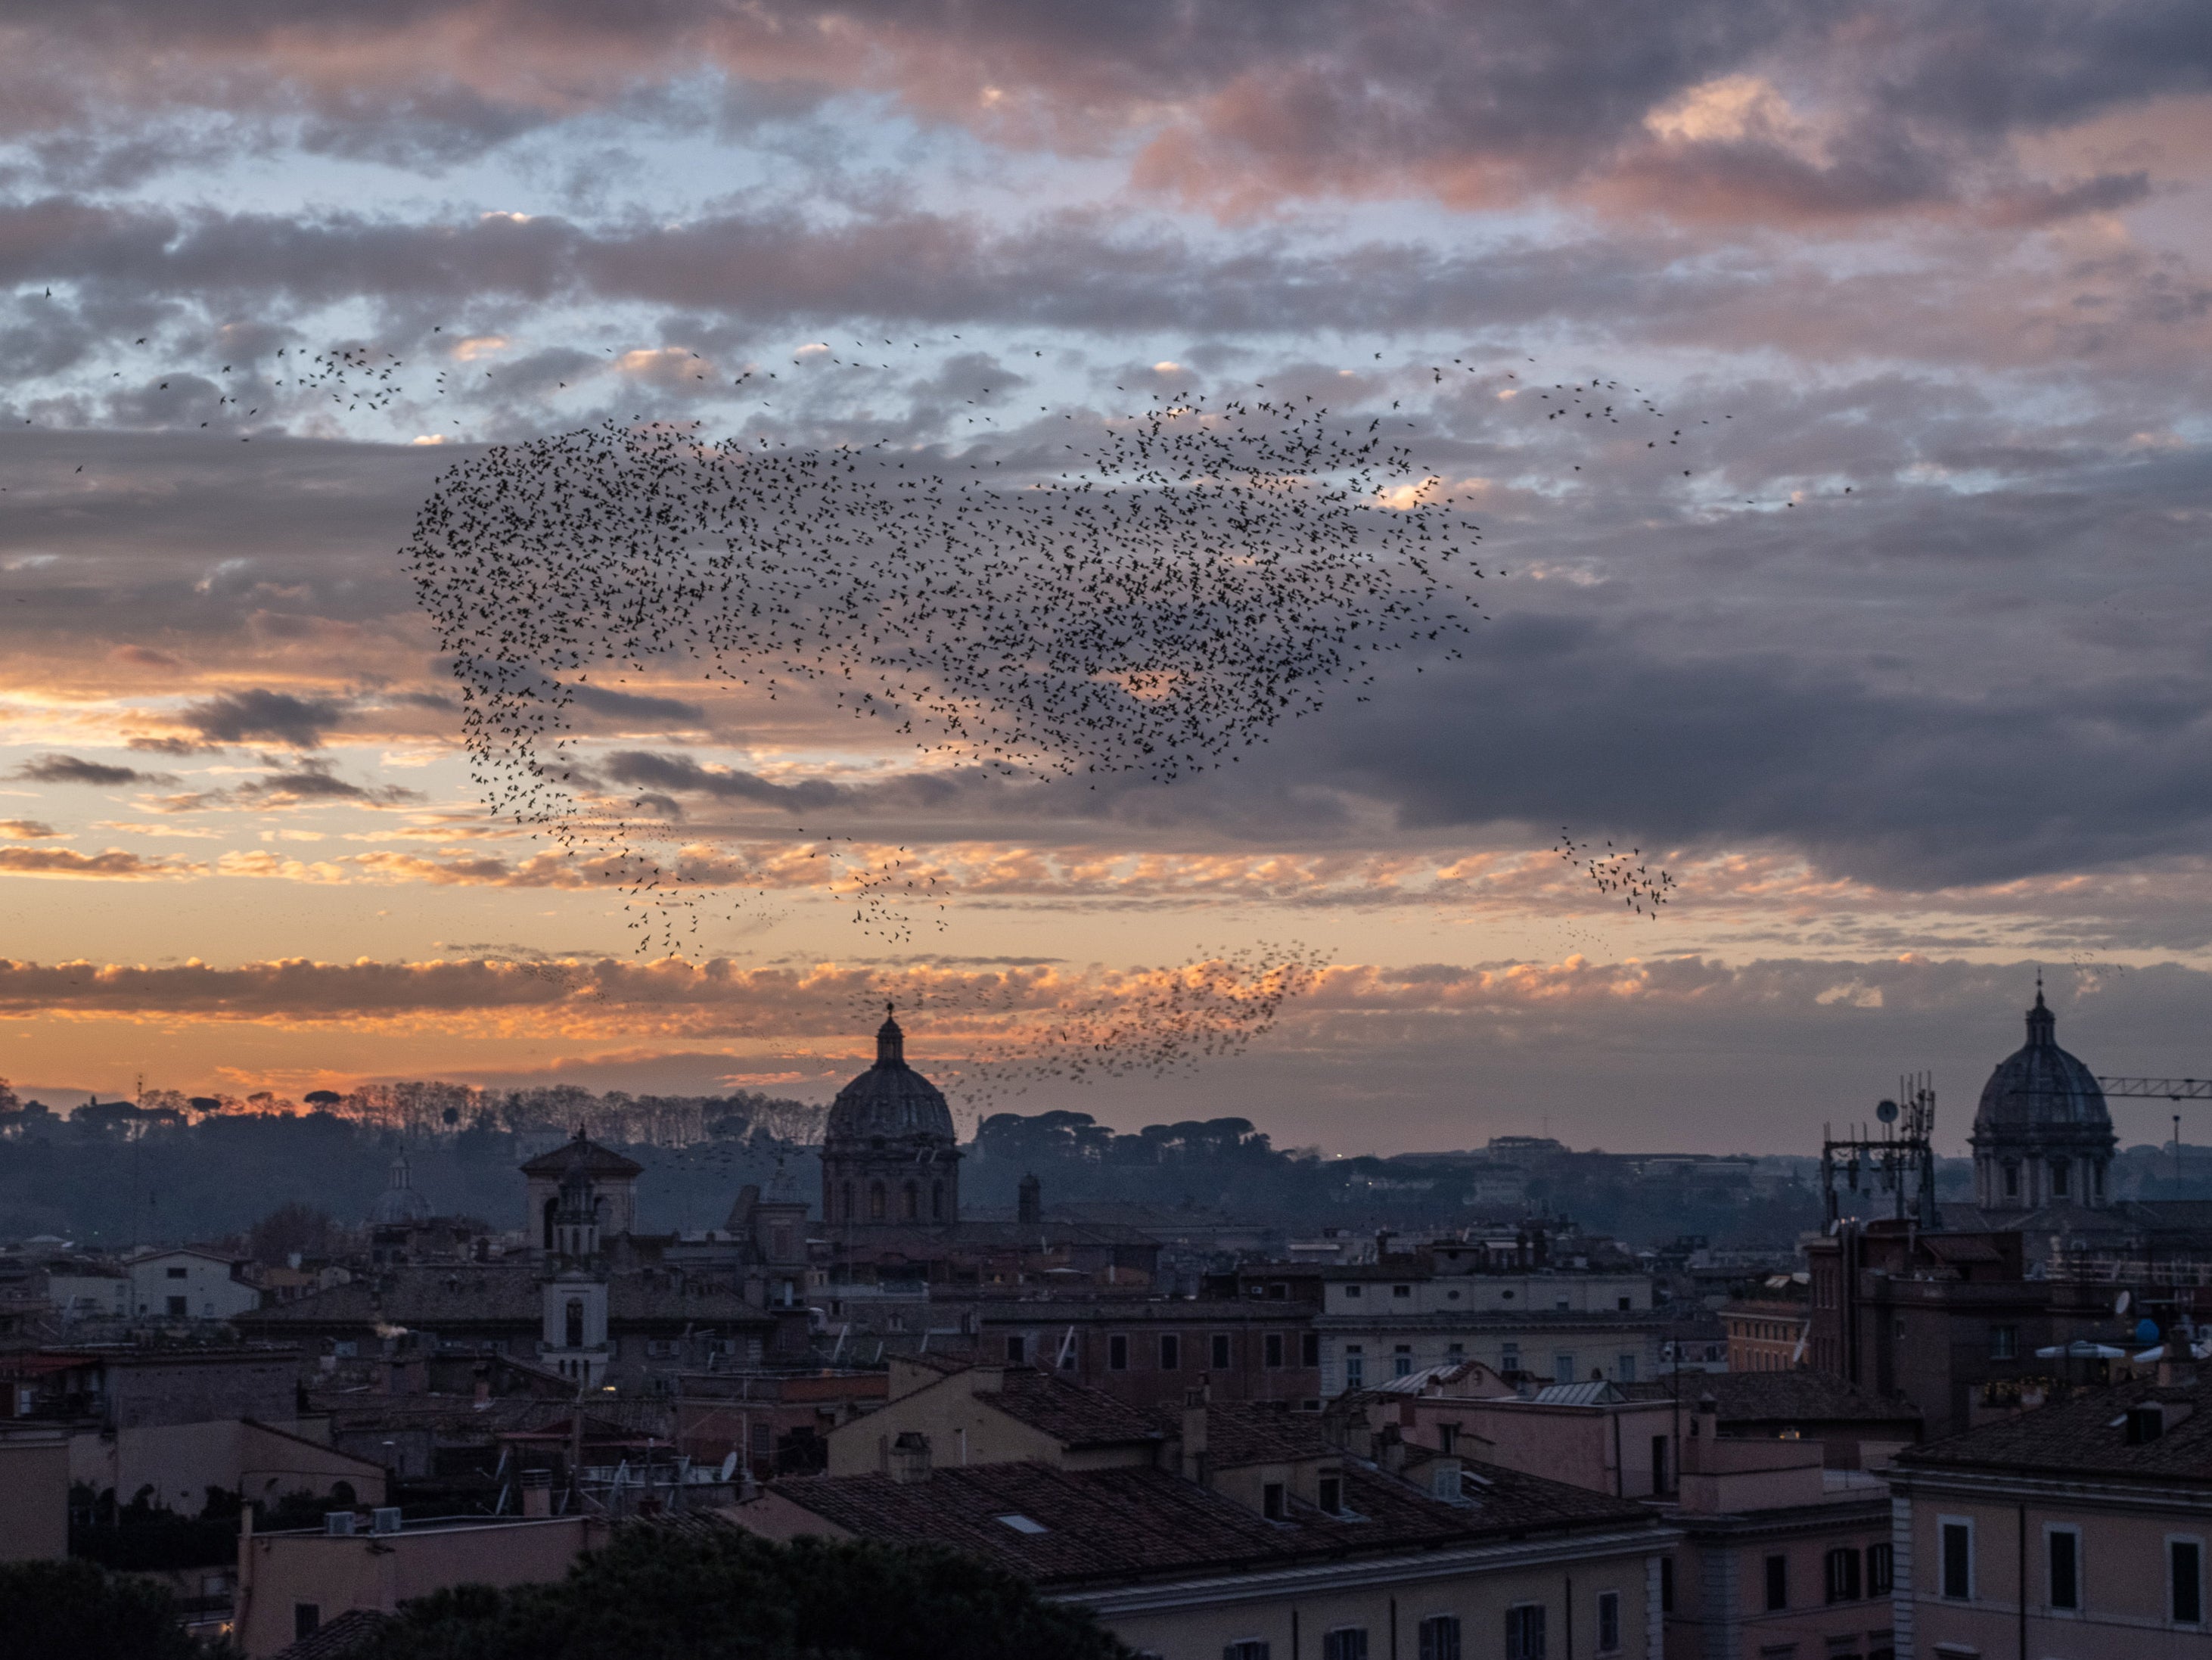 A sunset sky full of starlings beginning their night murmuration as seen from the Altare della Patria in Piazza Venezia in Rome